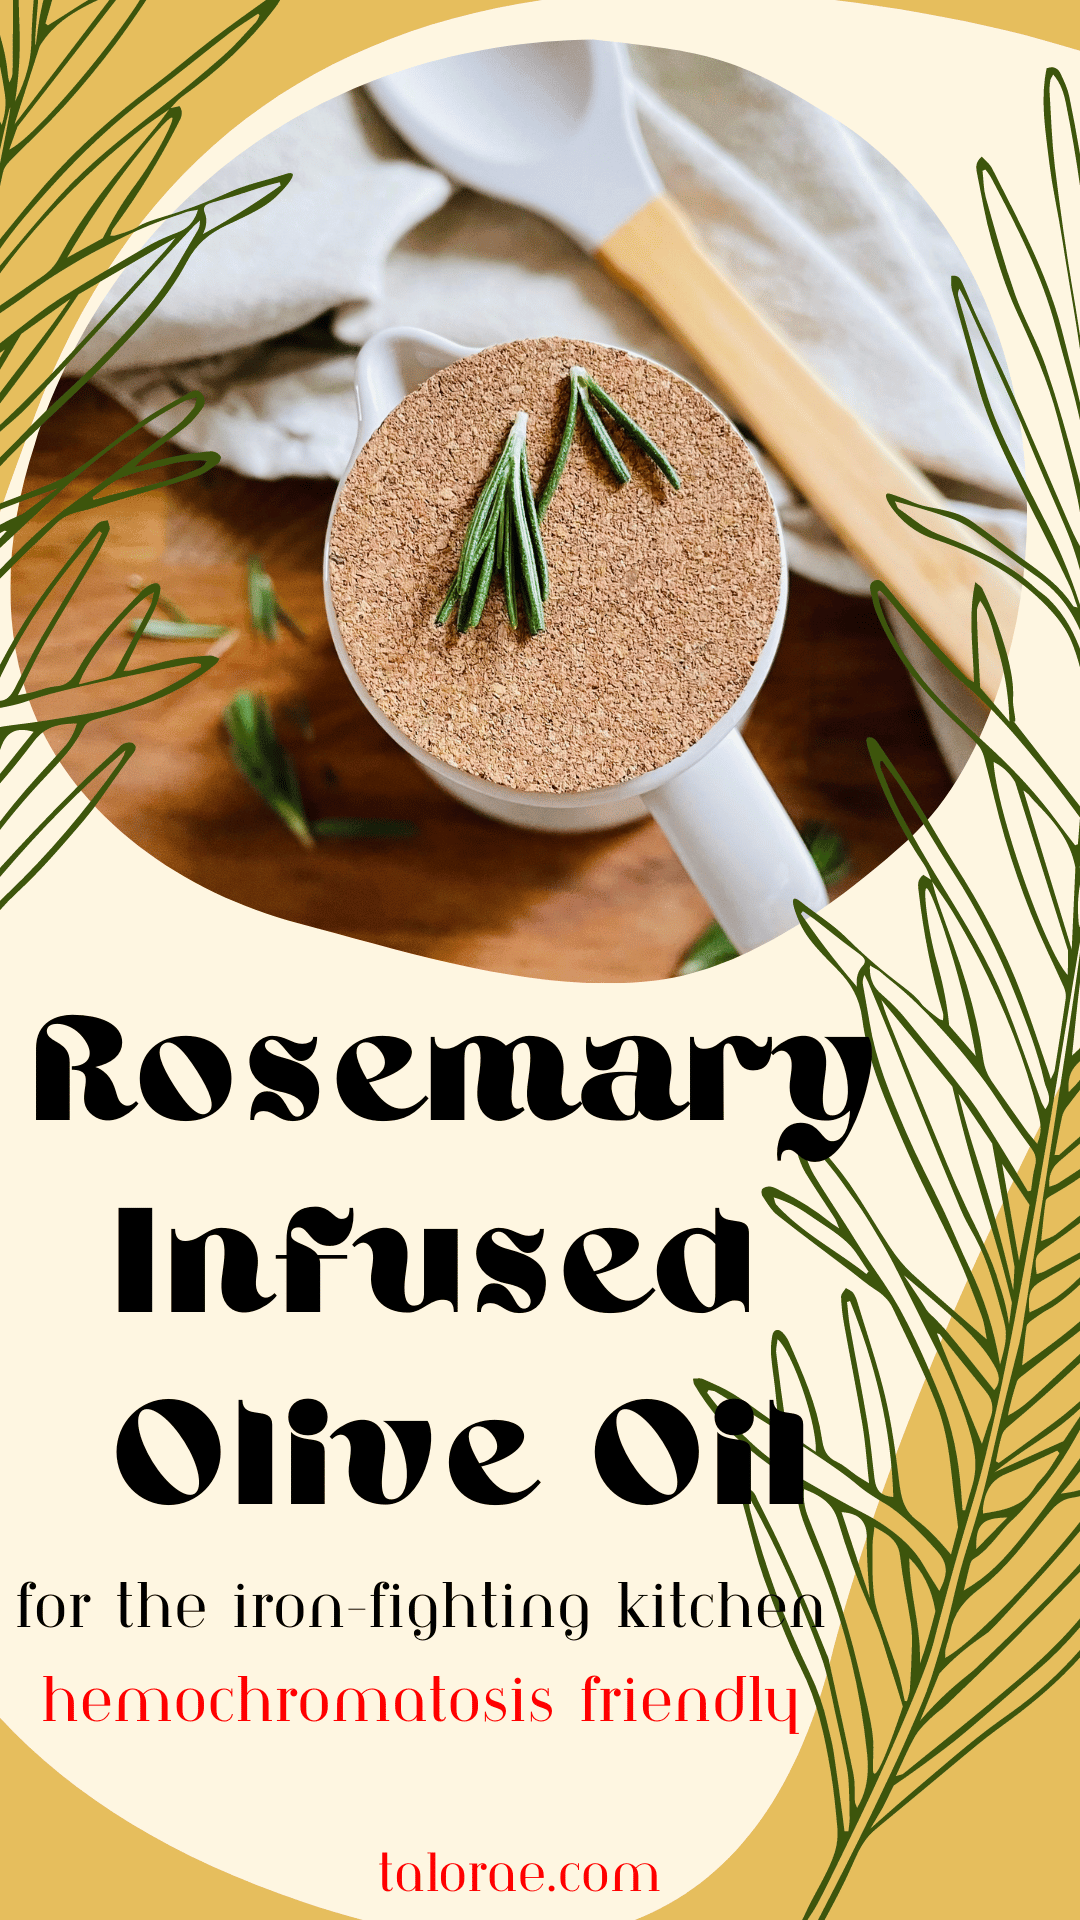 Rosemary Infused Olive Oil for hereditary hemochromatosis pin